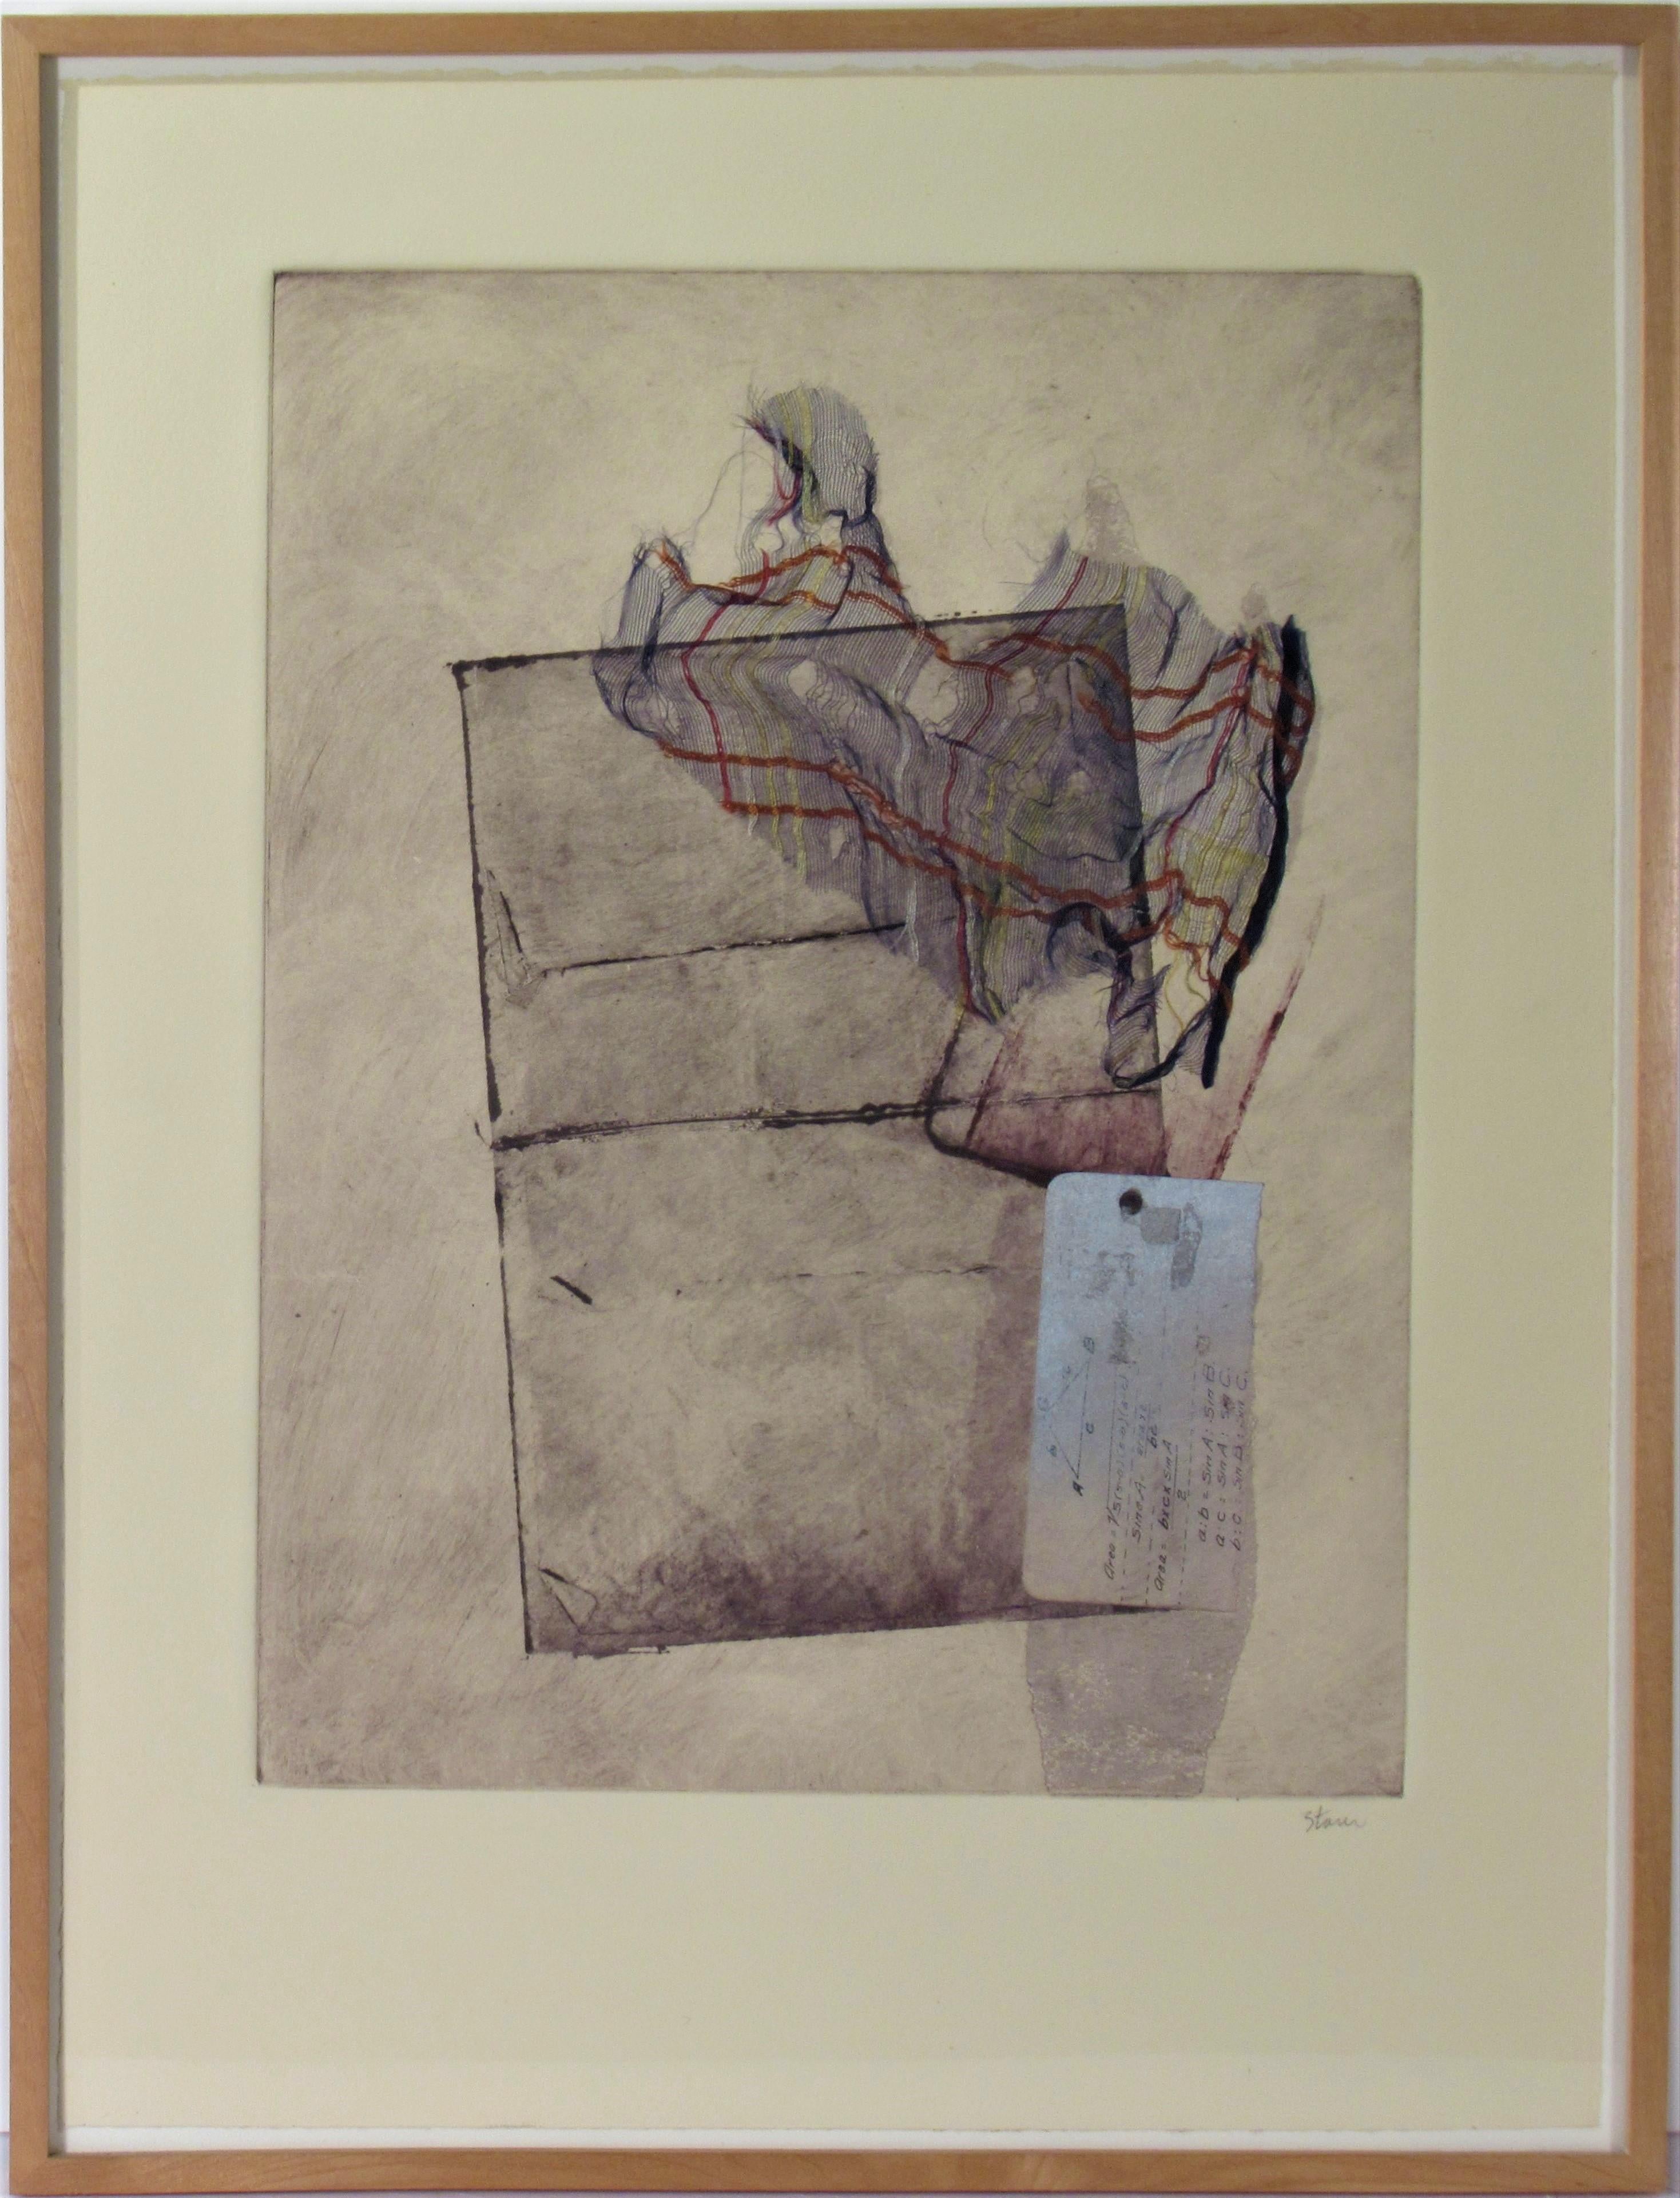 Inez Storer Abstract Print - "Diagrams" Monotype with collage